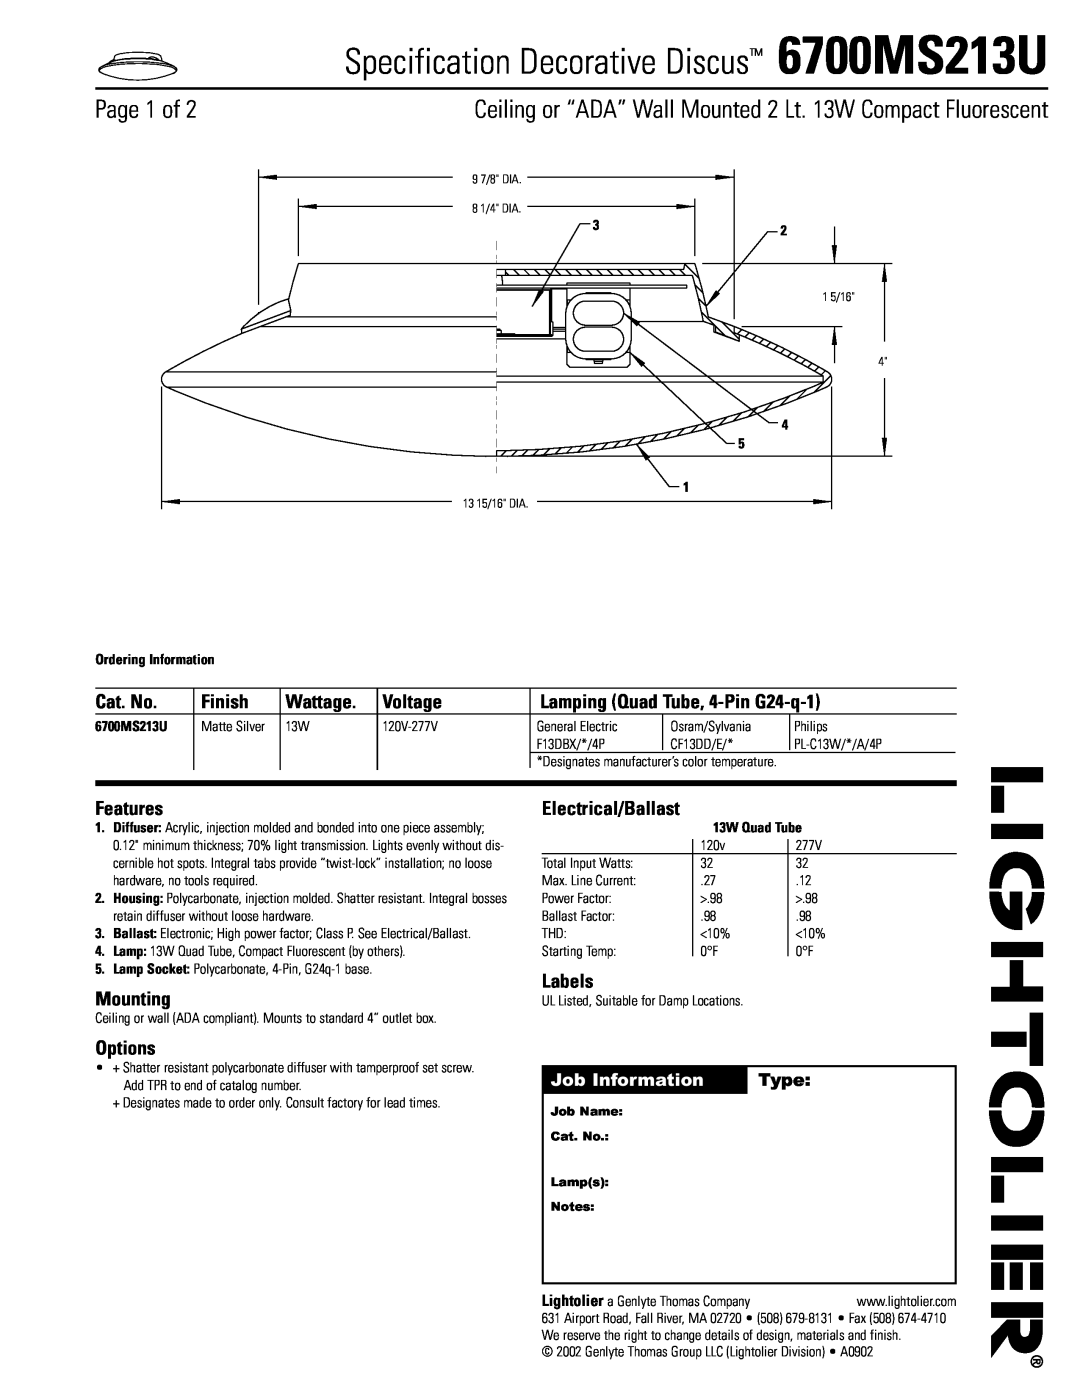 Lightolier manual Specification Decorative Discus 6700MS213U, Page 1 of 